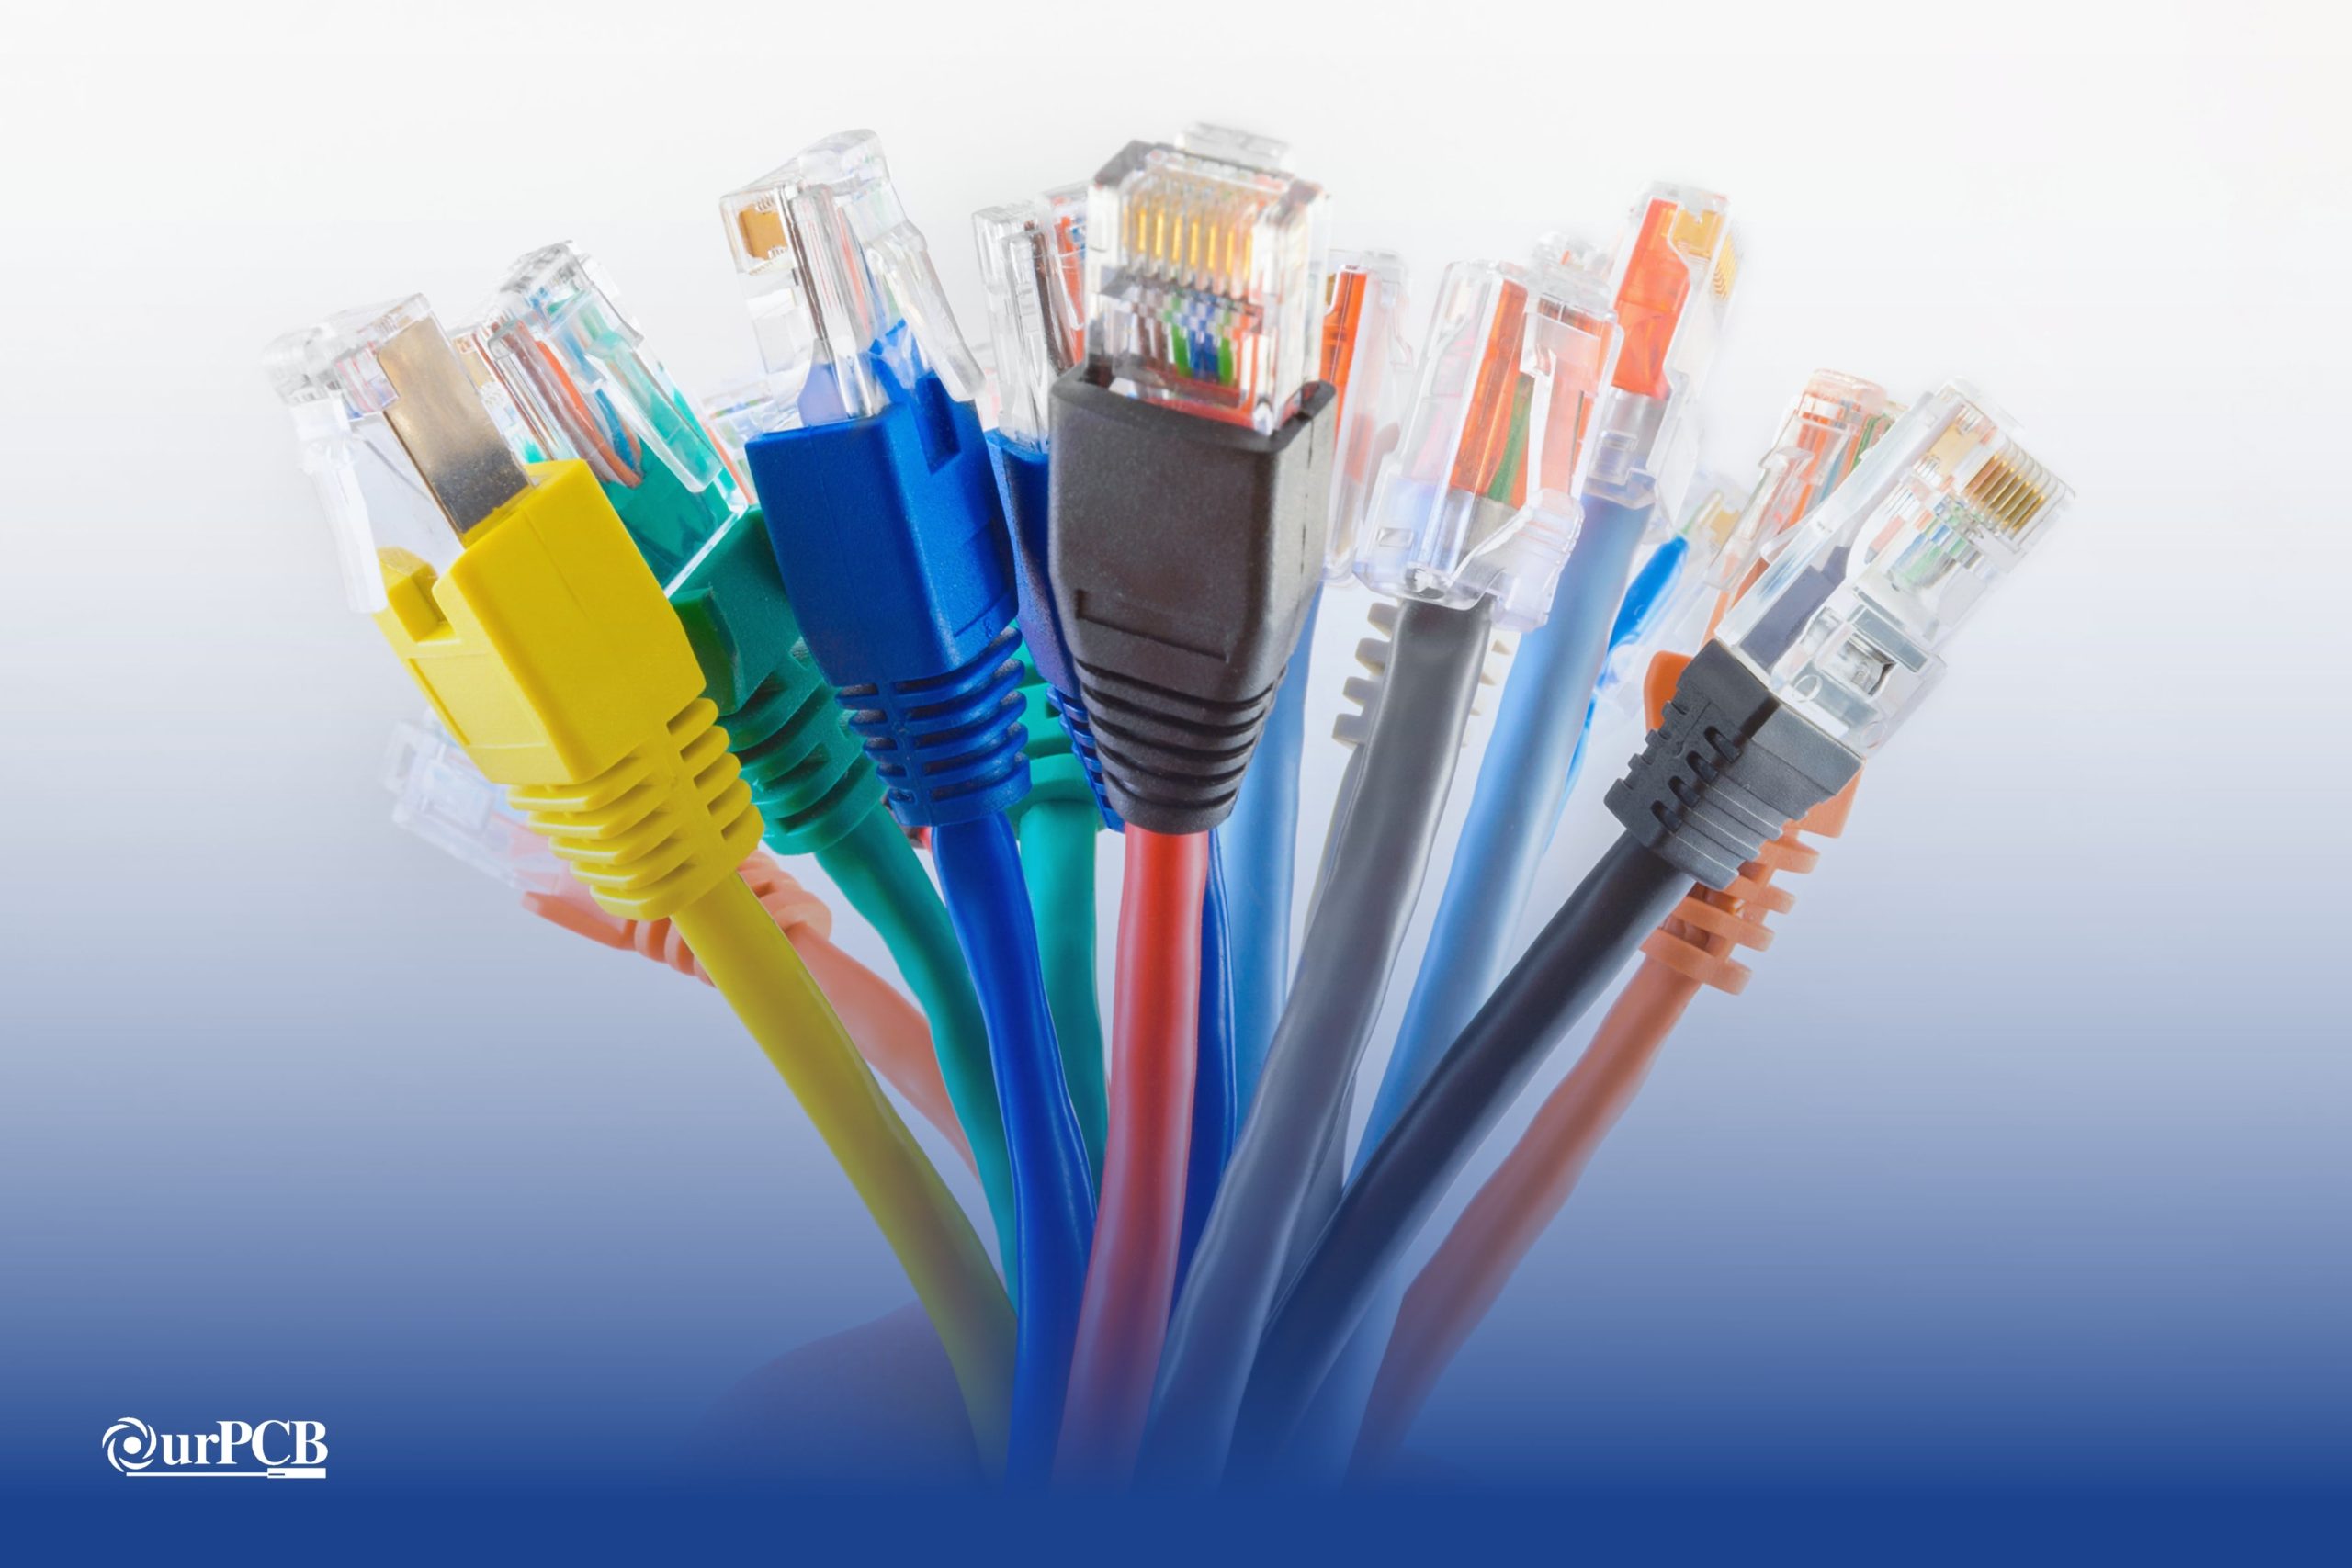 What Are Some Other RJ Cable Types